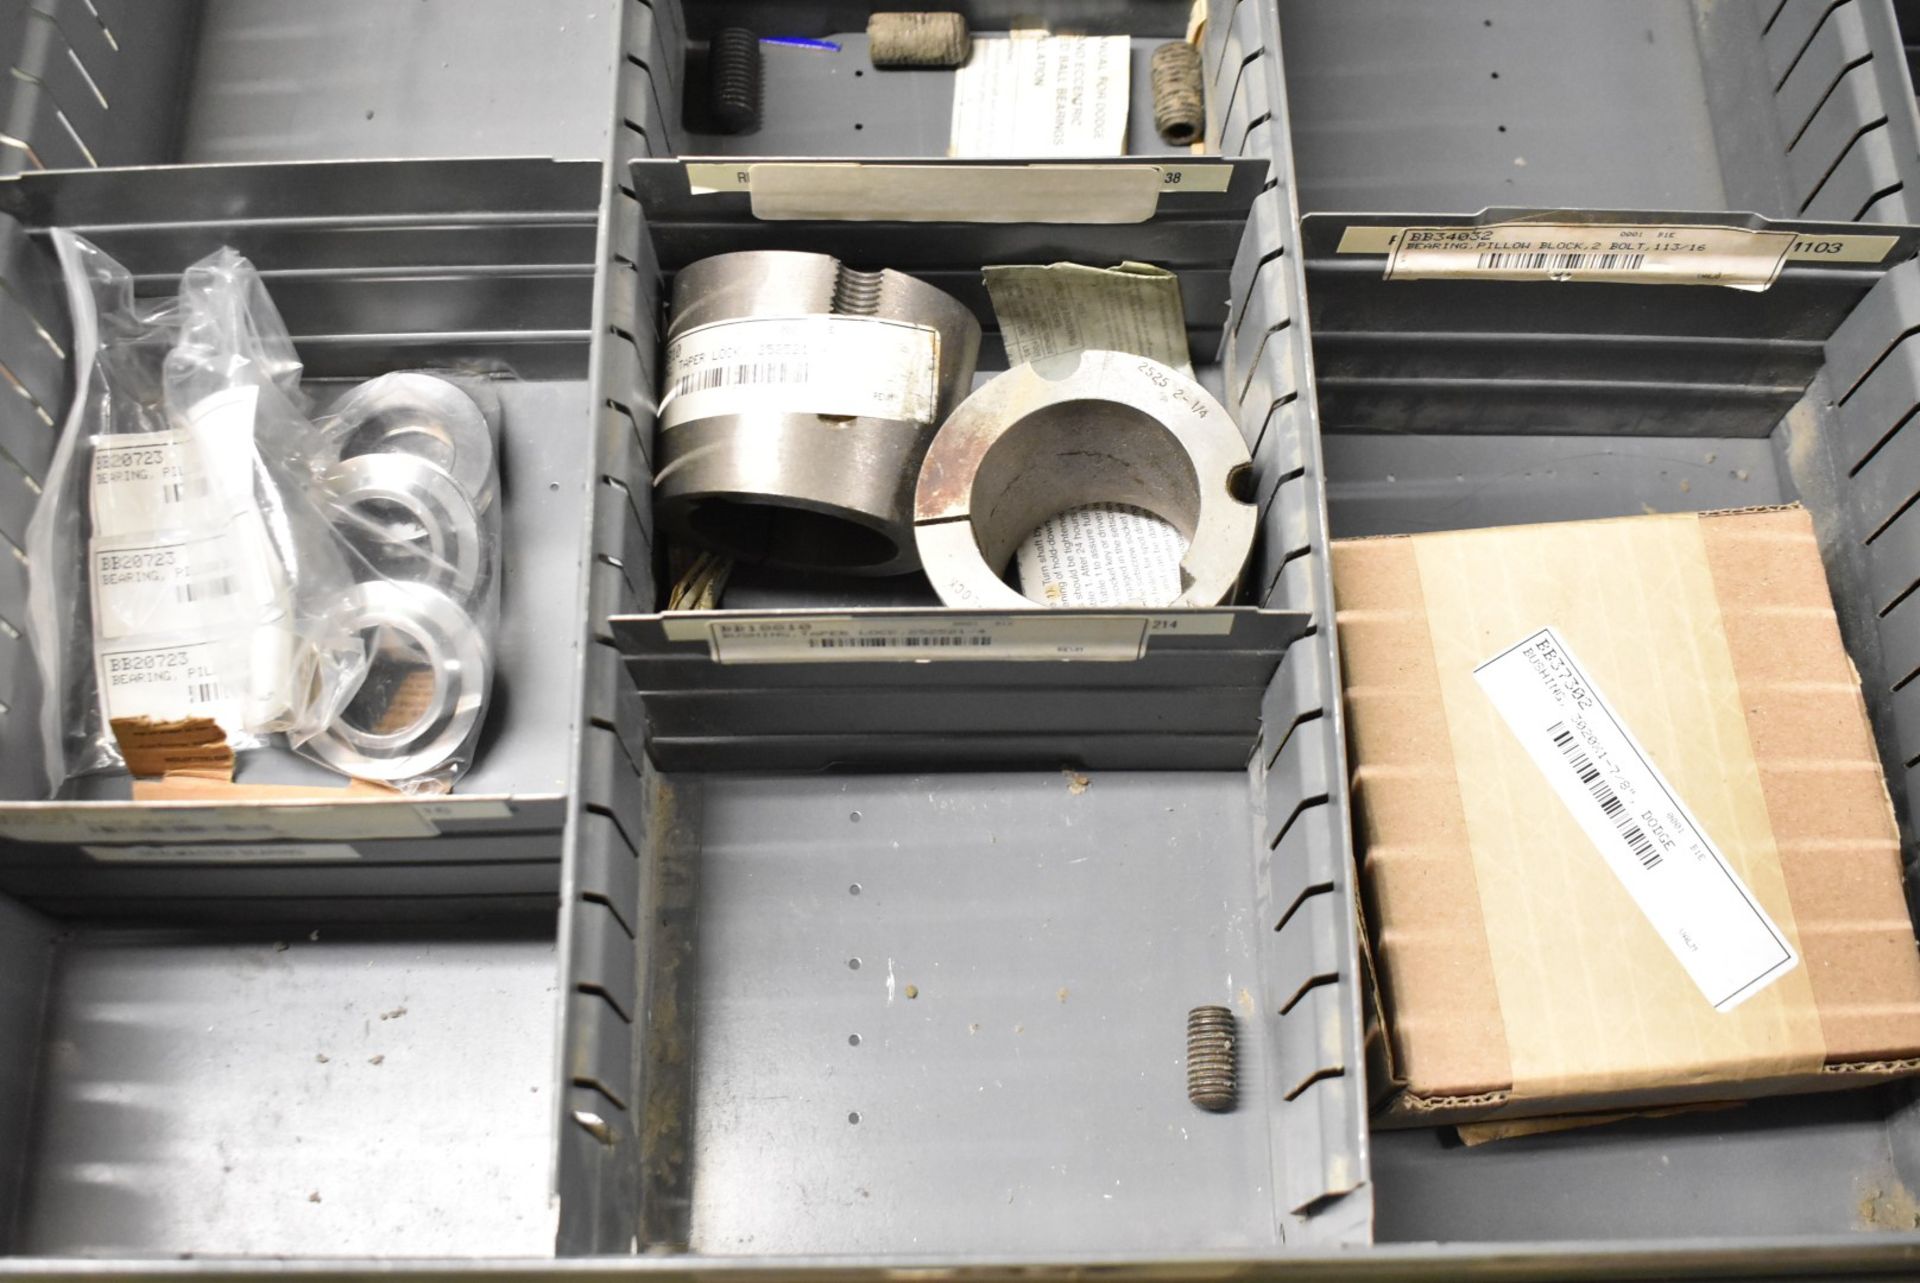 LOT/ CONTENTS OF CABINET - INCLUDING BUSHINGS, SPARE PARTS (TOOL CABINET NOT INCLUDED) [RIGGING FEES - Image 5 of 6